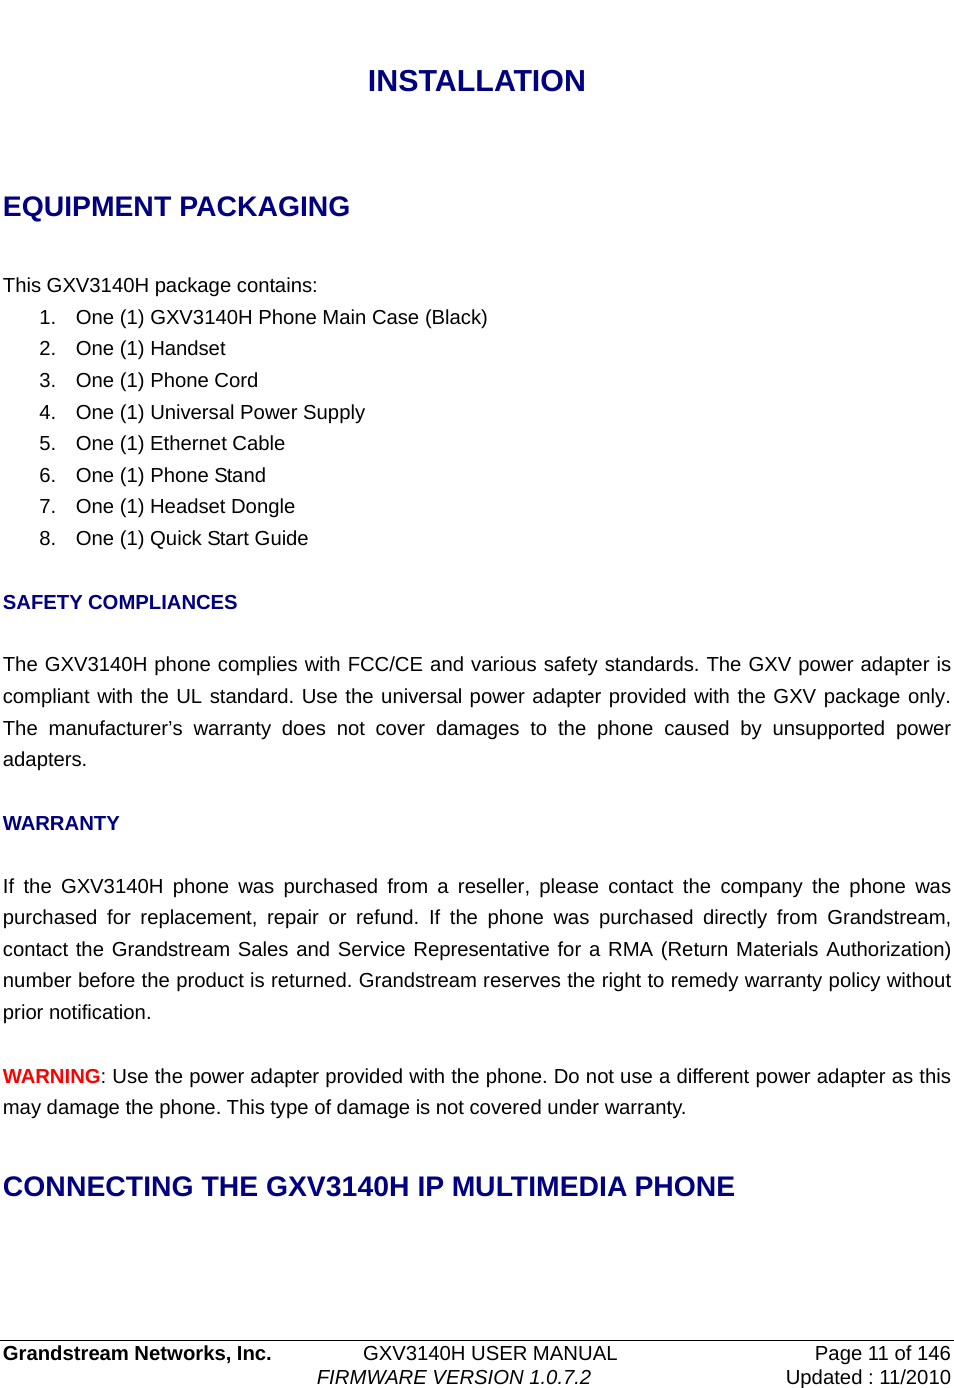   Grandstream Networks, Inc.         GXV3140H USER MANUAL  Page 11 of 146                                FIRMWARE VERSION 1.0.7.2 Updated : 11/2010    INSTALLATION  EQUIPMENT PACKAGING  This GXV3140H package contains: 1.  One (1) GXV3140H Phone Main Case (Black) 2.  One (1) Handset 3.  One (1) Phone Cord   4.  One (1) Universal Power Supply 5.  One (1) Ethernet Cable 6.  One (1) Phone Stand 7.  One (1) Headset Dongle 8.  One (1) Quick Start Guide  SAFETY COMPLIANCES  The GXV3140H phone complies with FCC/CE and various safety standards. The GXV power adapter is compliant with the UL standard. Use the universal power adapter provided with the GXV package only.  The manufacturer’s warranty does not cover damages to the phone caused by unsupported power adapters.  WARRANTY  If the GXV3140H phone was purchased from a reseller, please contact the company the phone was purchased for replacement, repair or refund. If the phone was purchased directly from Grandstream, contact the Grandstream Sales and Service Representative for a RMA (Return Materials Authorization) number before the product is returned. Grandstream reserves the right to remedy warranty policy without prior notification.  WARNING: Use the power adapter provided with the phone. Do not use a different power adapter as this may damage the phone. This type of damage is not covered under warranty.  CONNECTING THE GXV3140H IP MULTIMEDIA PHONE  